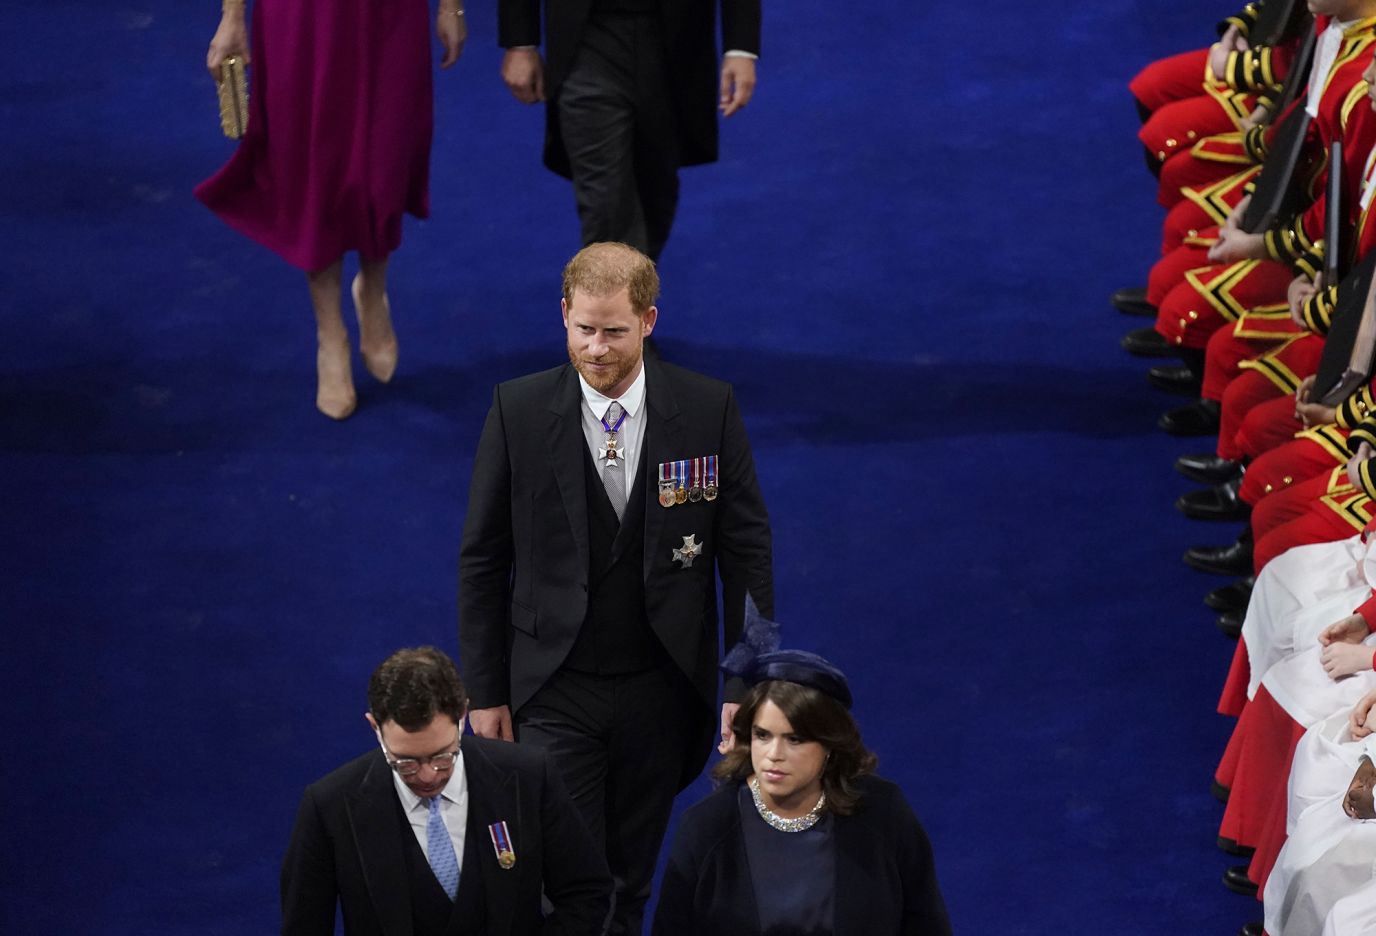 Prince Harry, William's brother, enters Westminster Abbey. <a href='https://www.cnn.com/uk/live-news/king-charles-iii-coronation-ckc-intl-gbr/h_d46a1c2f25cd5c5ed888c323a5411ae9' target='_blank'>He accepted the invitation to his father's coronation</a> but was without his wife, Meghan, who stayed back in California with the couple's two children.